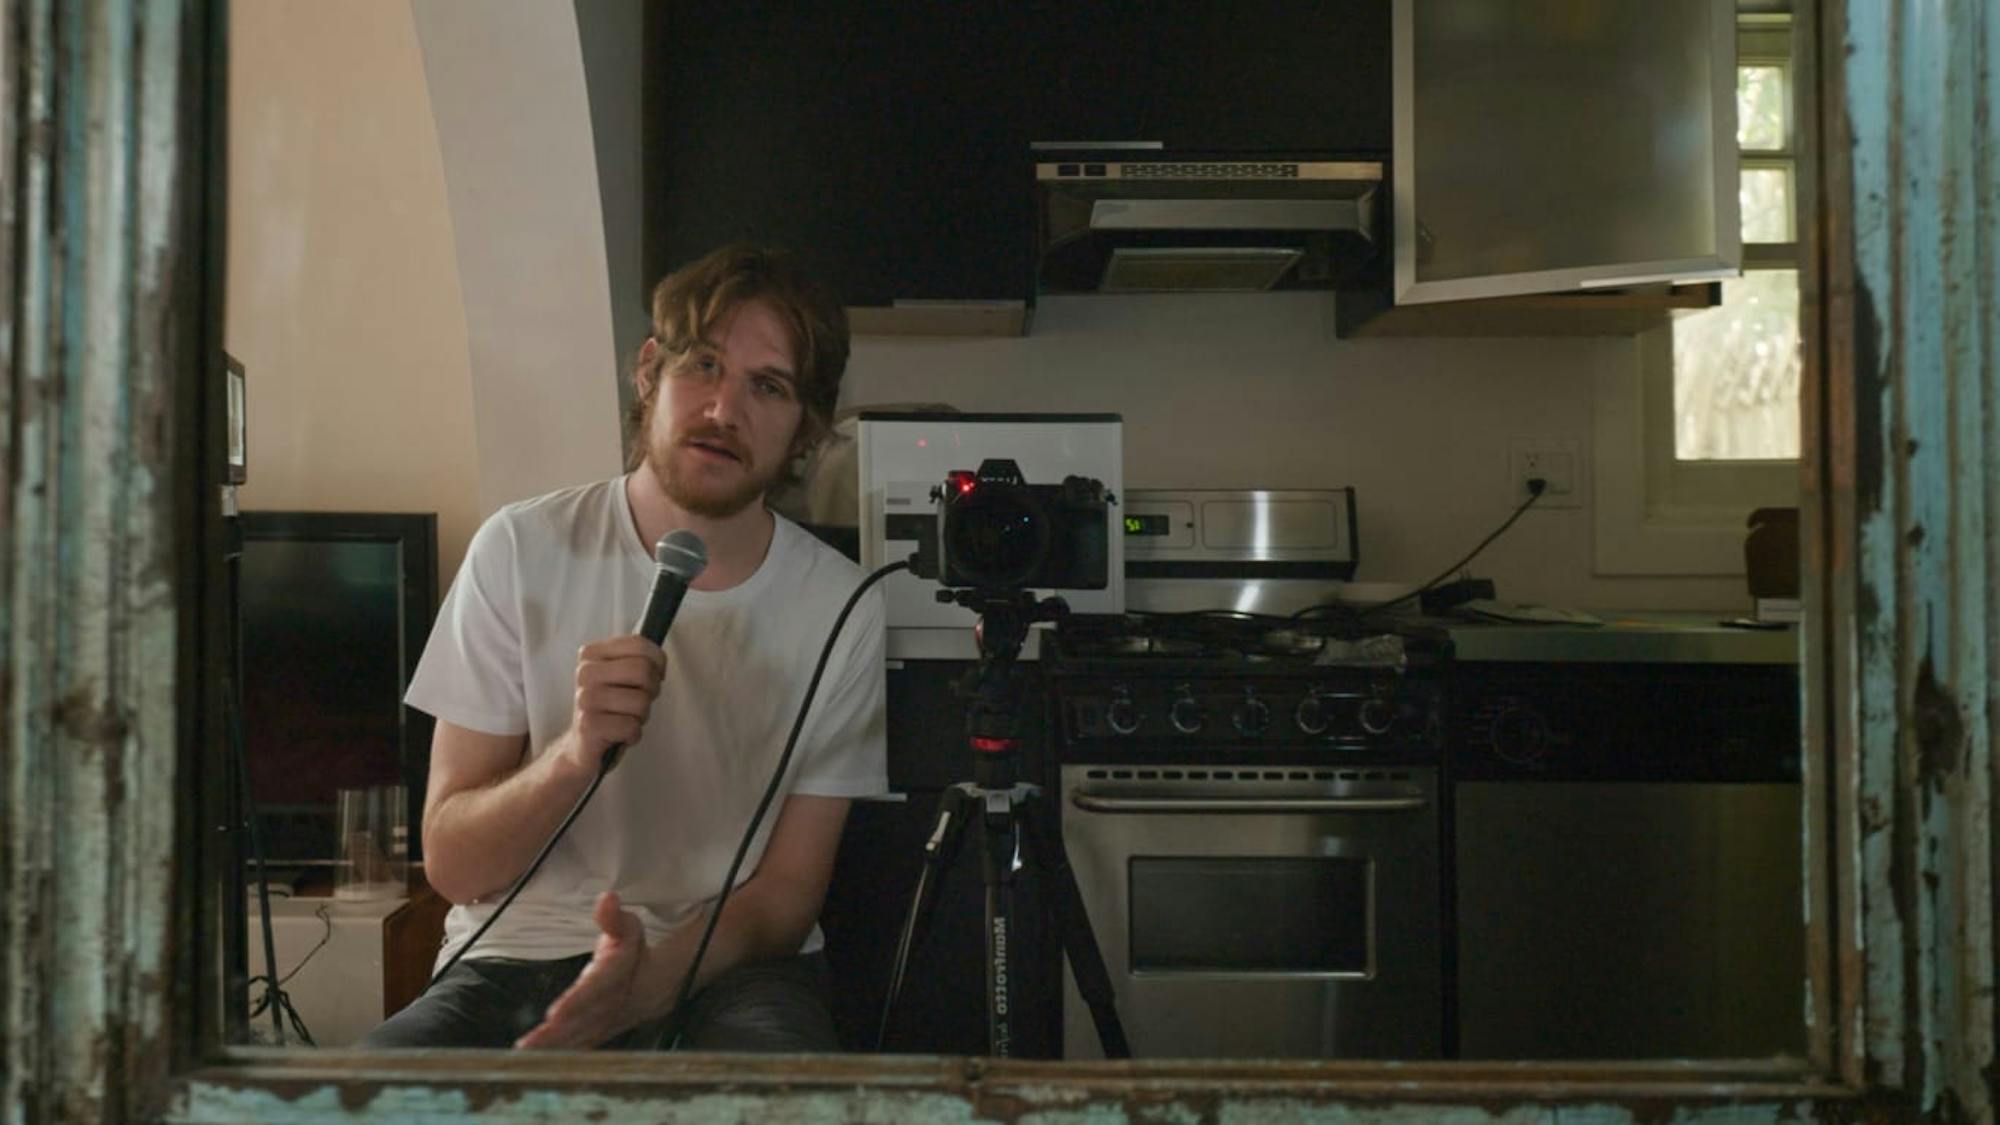 Bo Burnham sings into a microphone looking in a mirror. He has camera equipment, and a kitchen in the background. The mirror is edged with a blue frame.